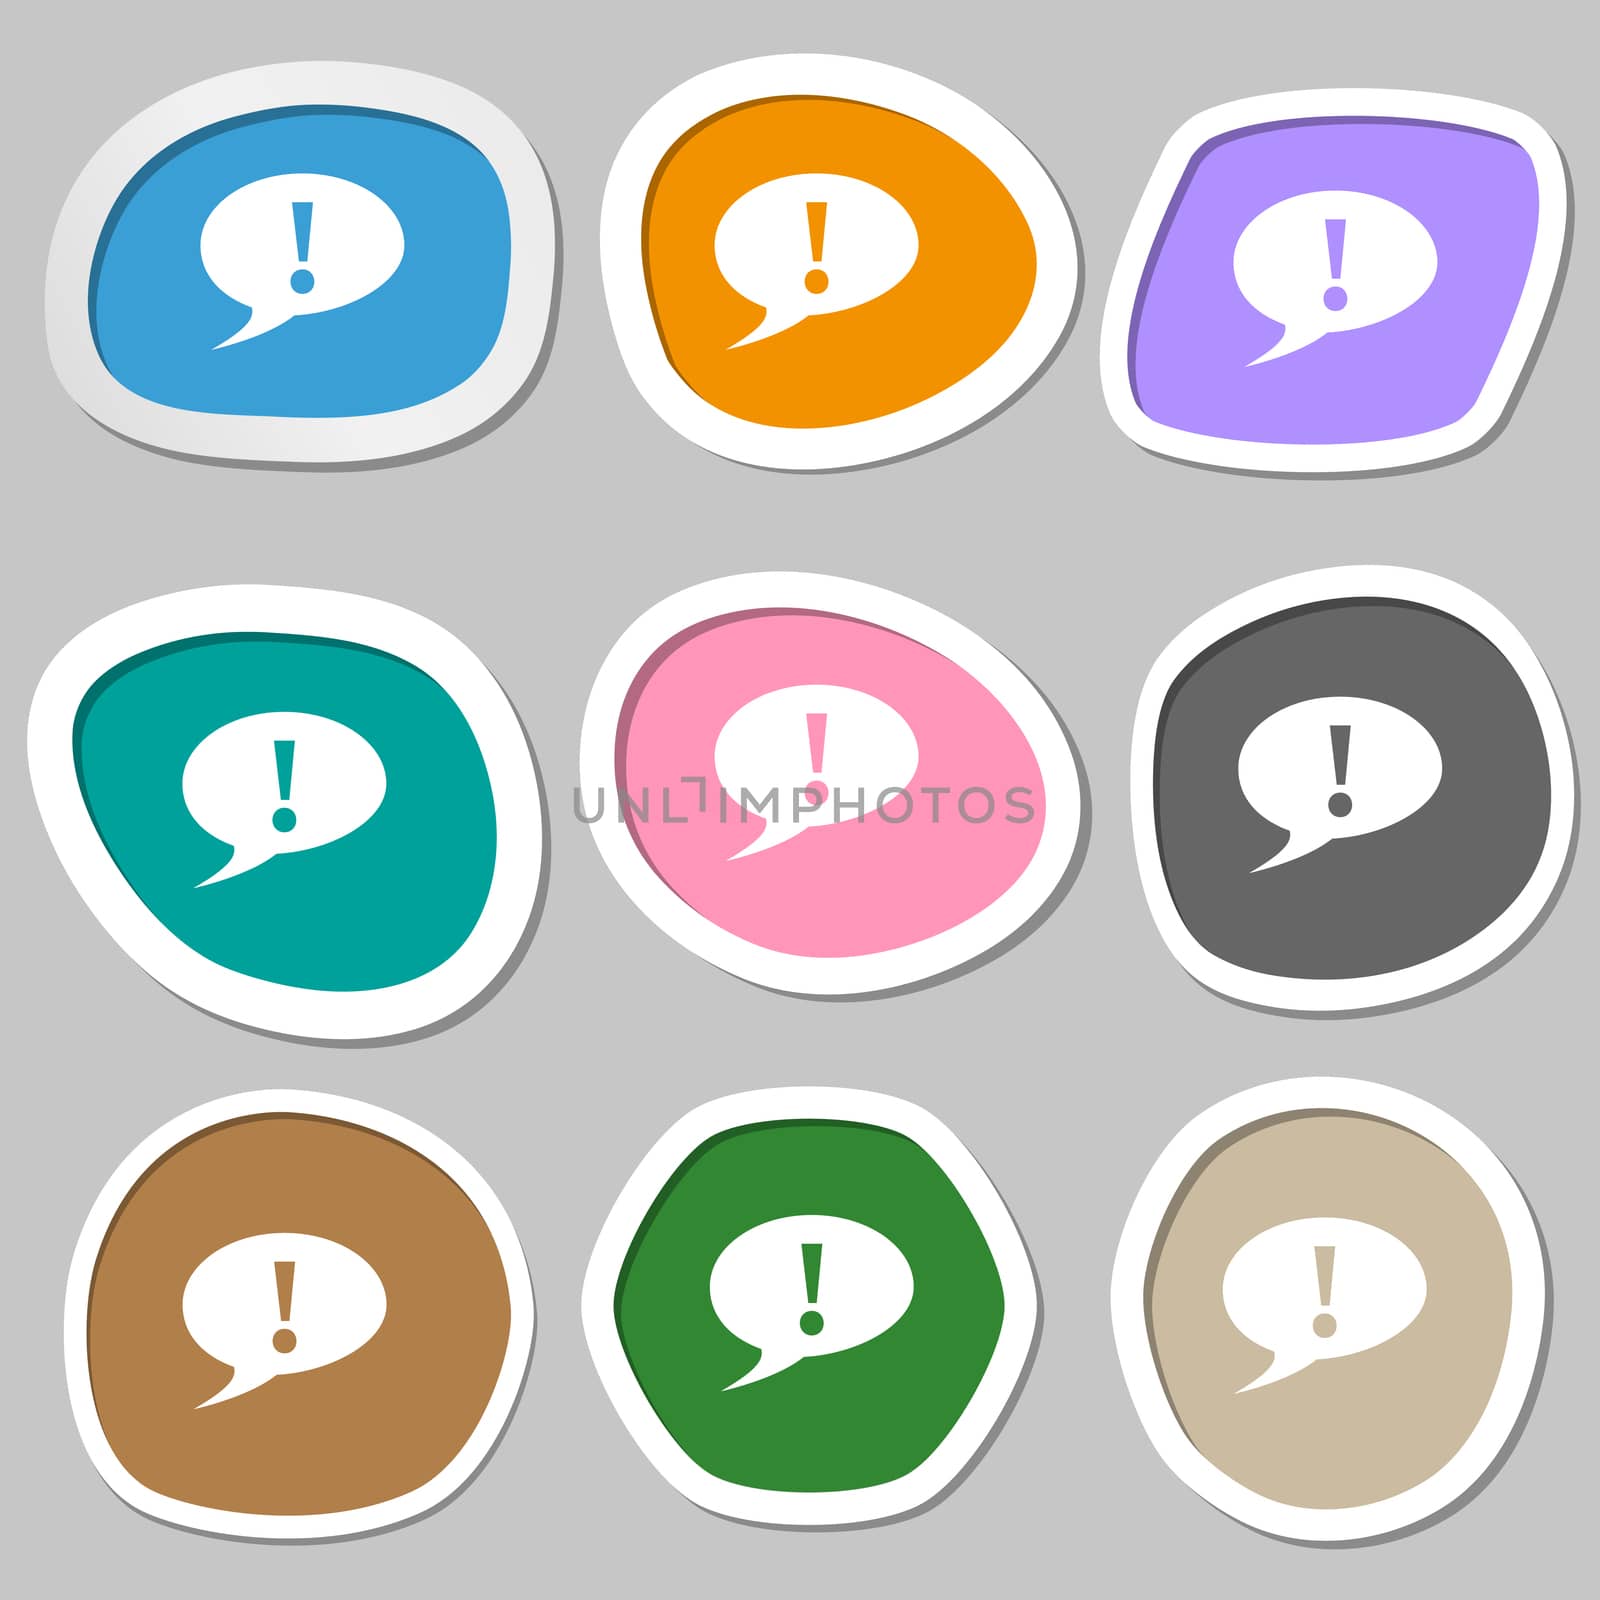 Exclamation mark sign icon. Attention speech bubble symbol. Multicolored paper stickers. illustration